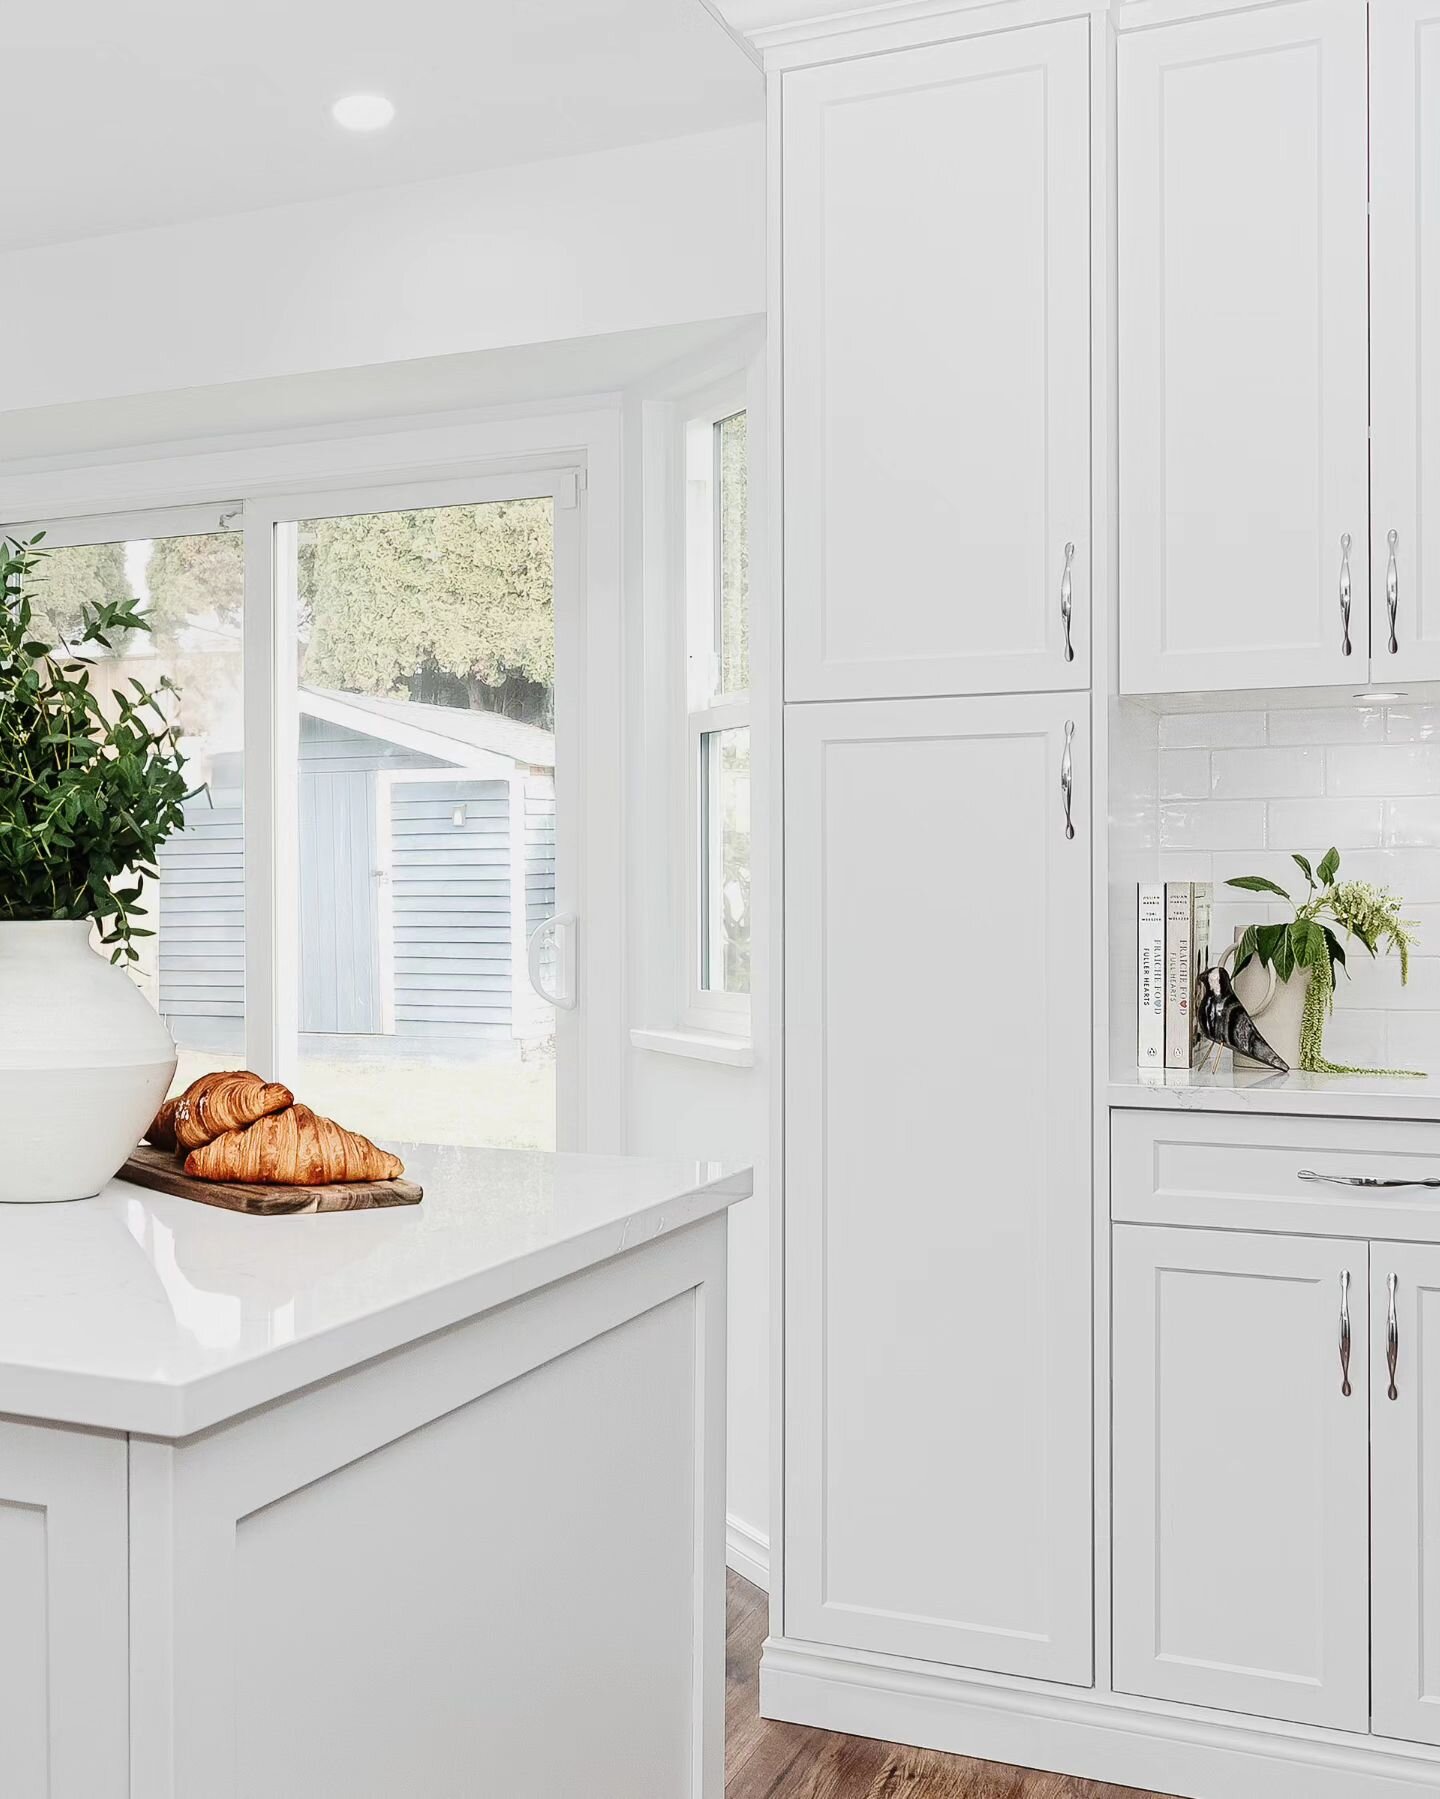 Embracing the timeless charm of an all-white palette. Timeless and classic. Say goodbye to gloomy cooking sessions

#kitcheninterior #kitchendesign #kitcheninteriordesign #kitchenremodel #kitchenrenovations #kitchenideas #interiordesigncanada #vancou